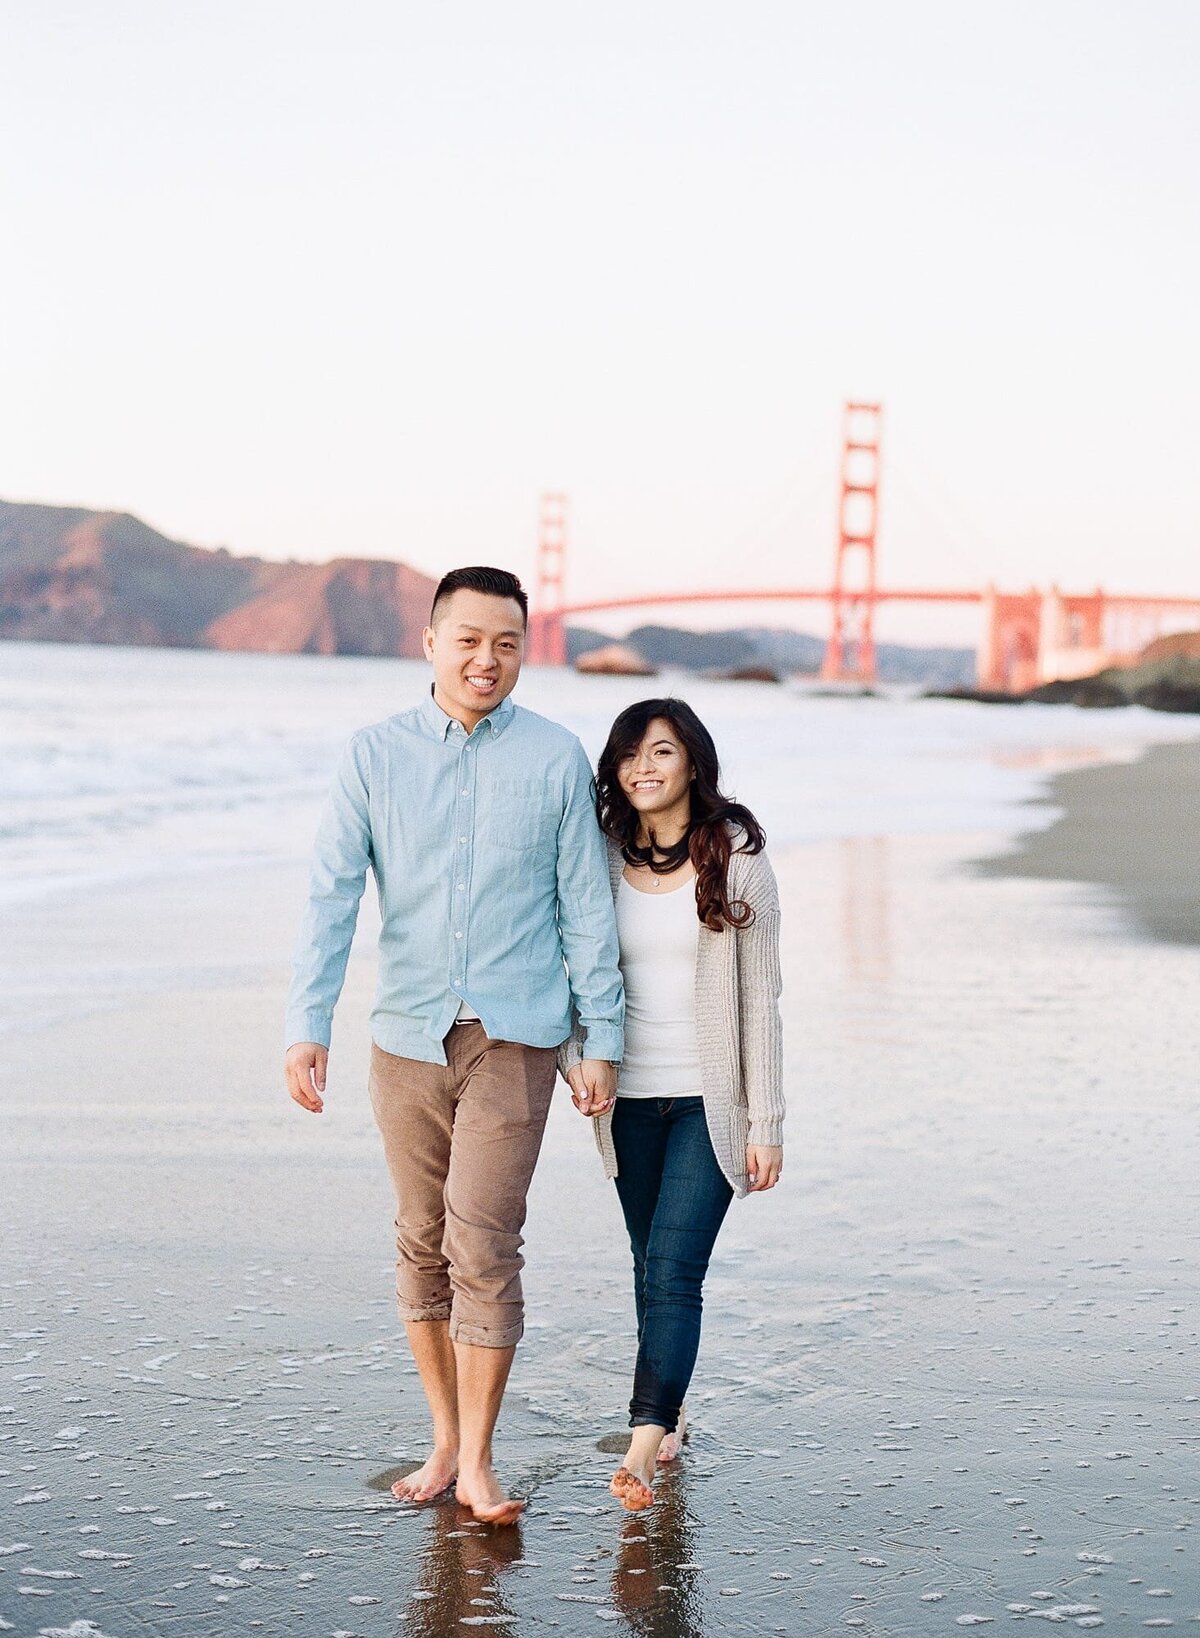 Happy couple hold hands and walk on the beach in front of the Golden Gate Bridge.